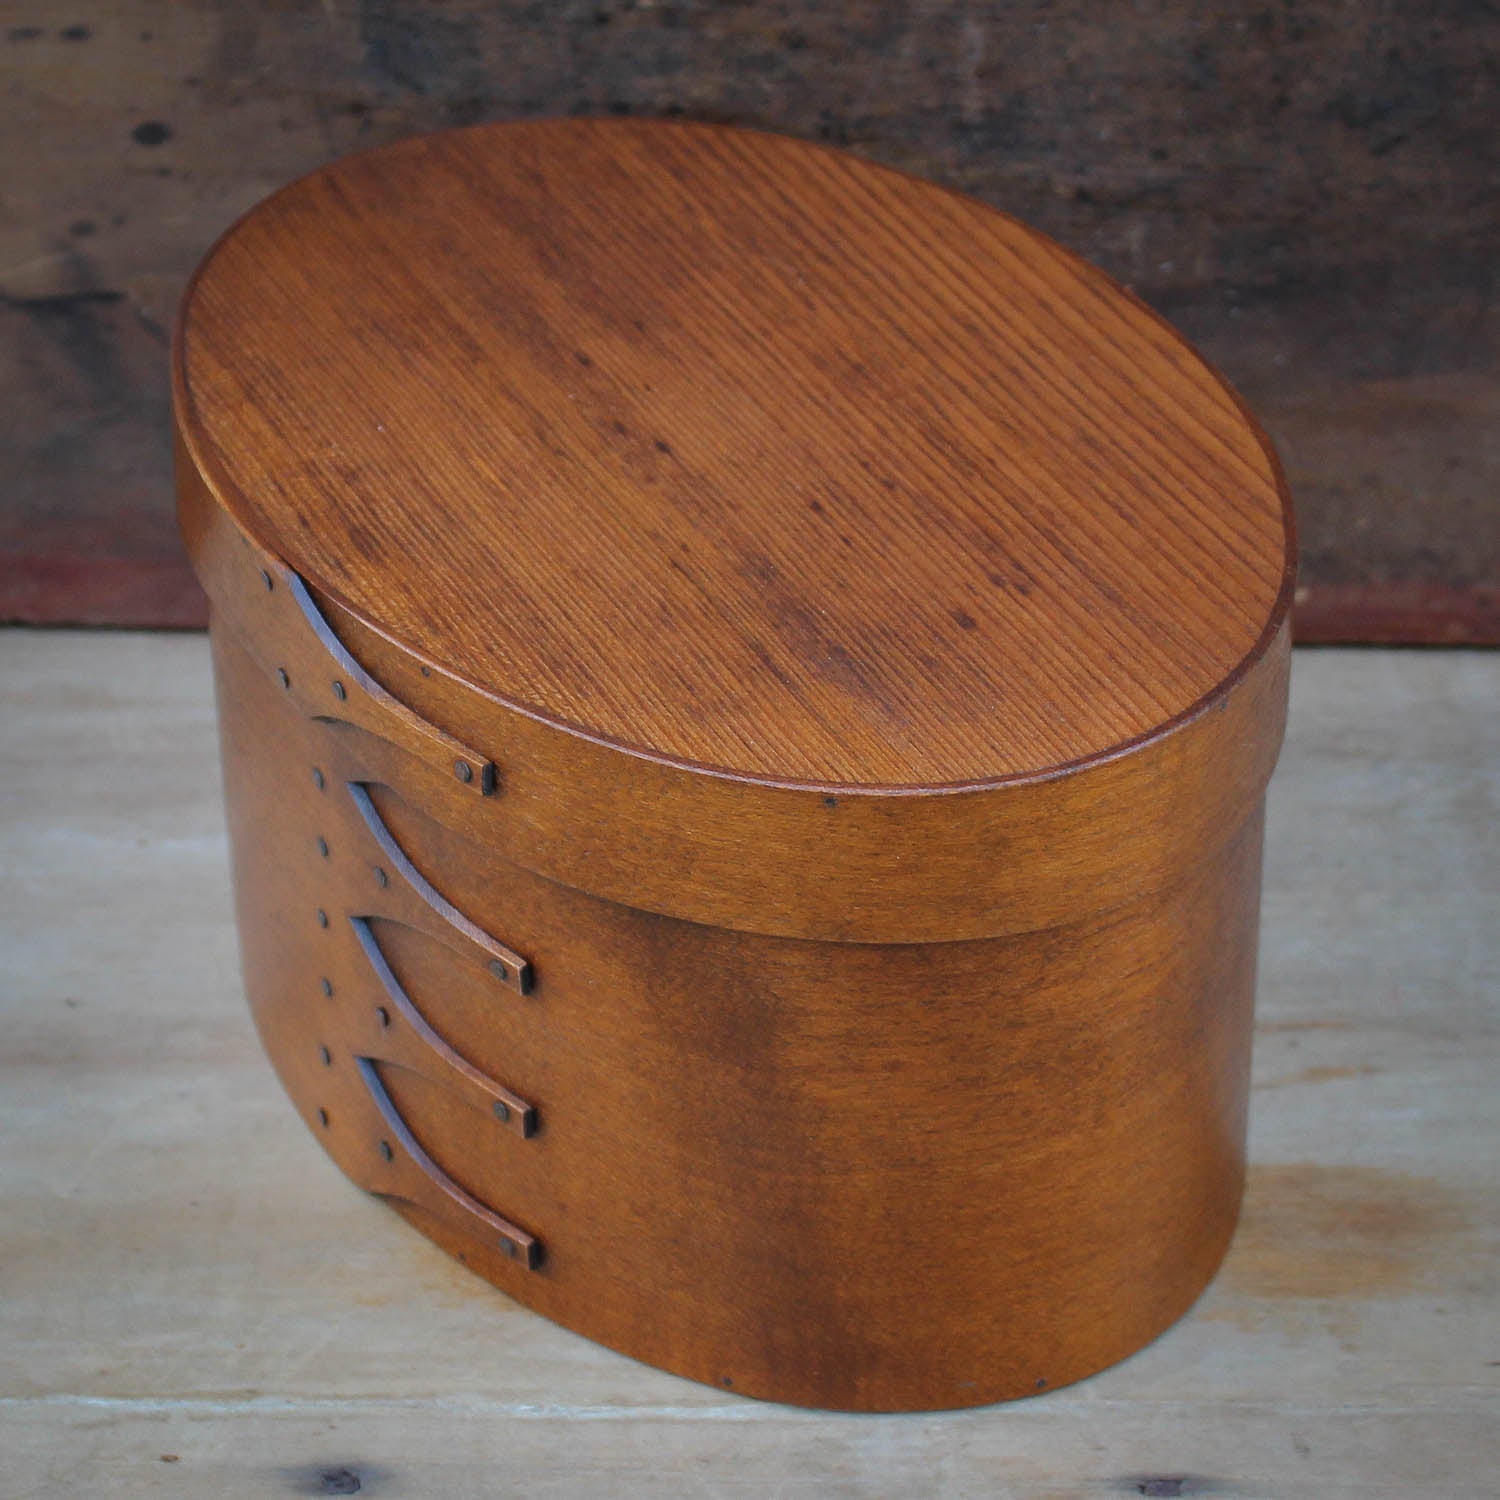 Shaker Oval Box, Size #5 Tall, LeHays Shaker Boxes, Handcrafted in Maine.  Antiqued Natural Finish, Side View